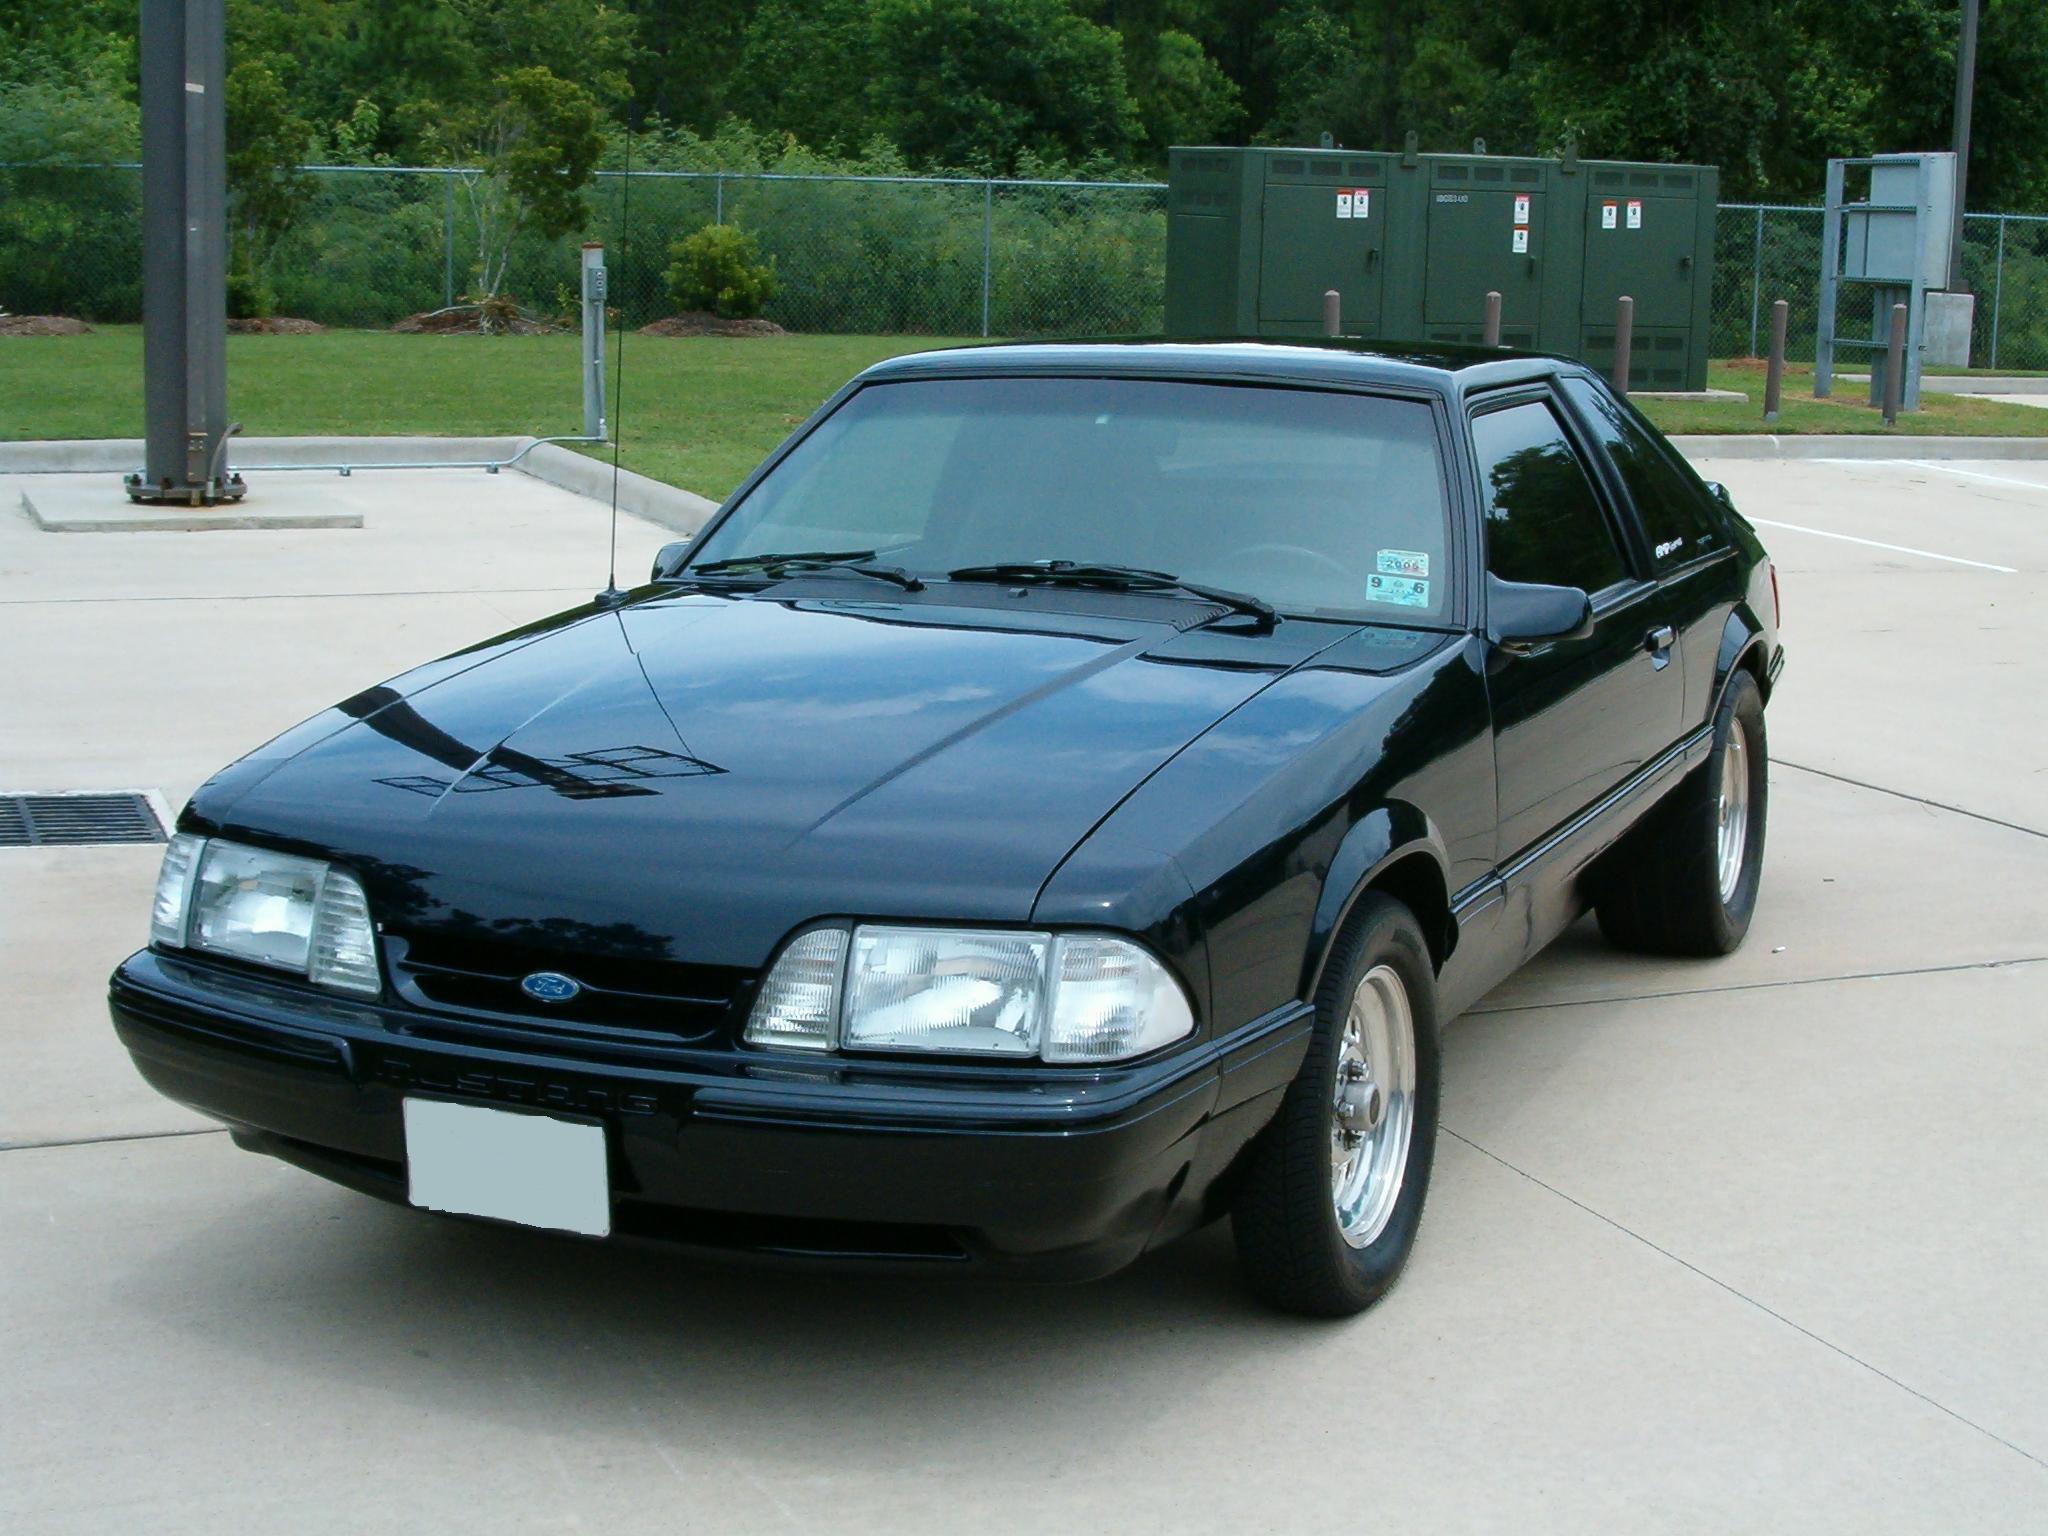 Specs on 1989 ford mustang #5